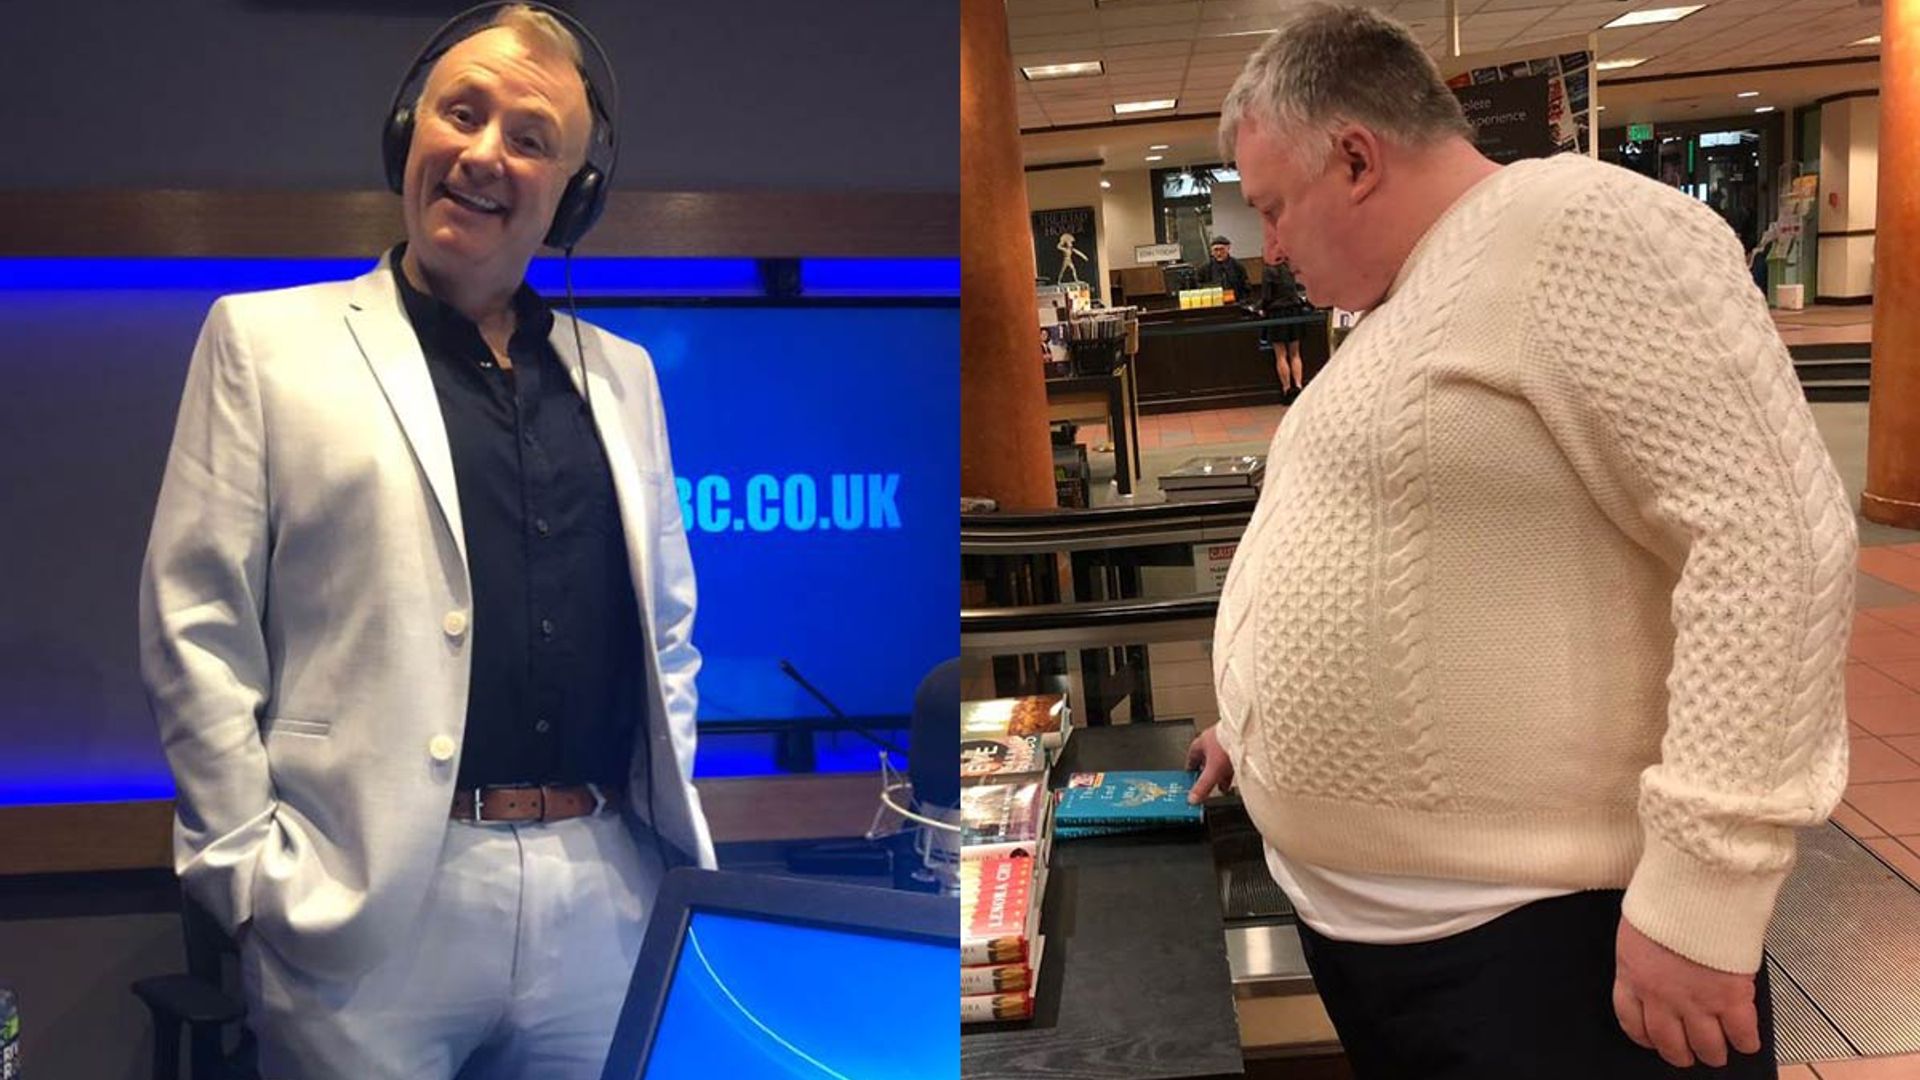 Weight Loss Bbc S Stephen Nolan Sheds 8 Stone In Just 4 Months See Photos Hello